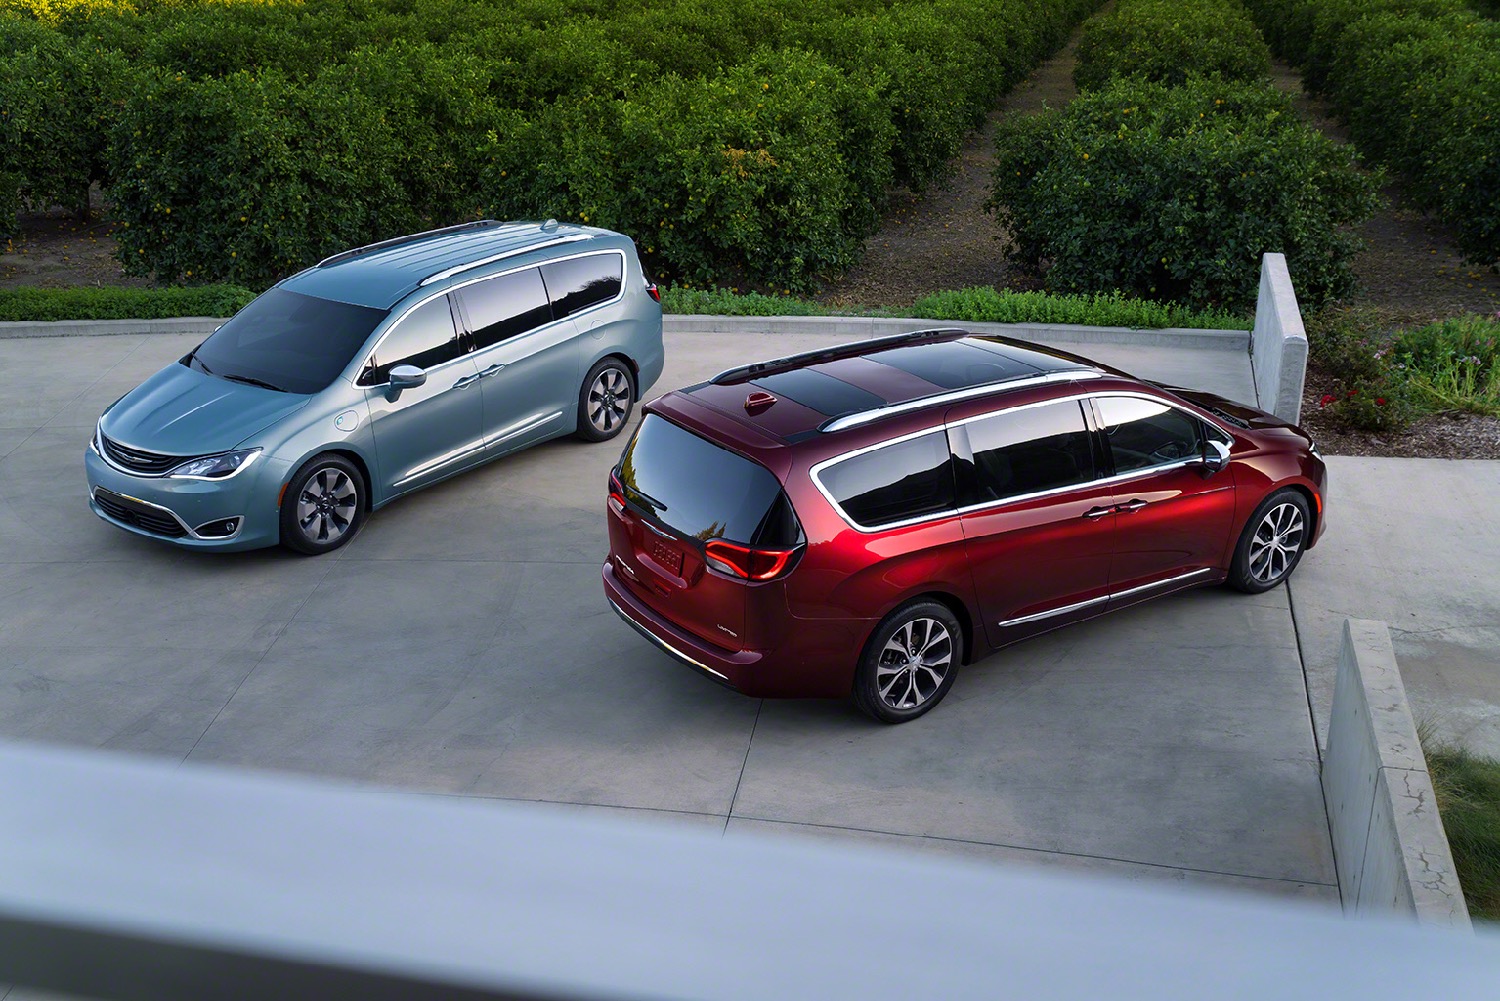 2017 Chrysler Pacifica and Pacifica Hybrid